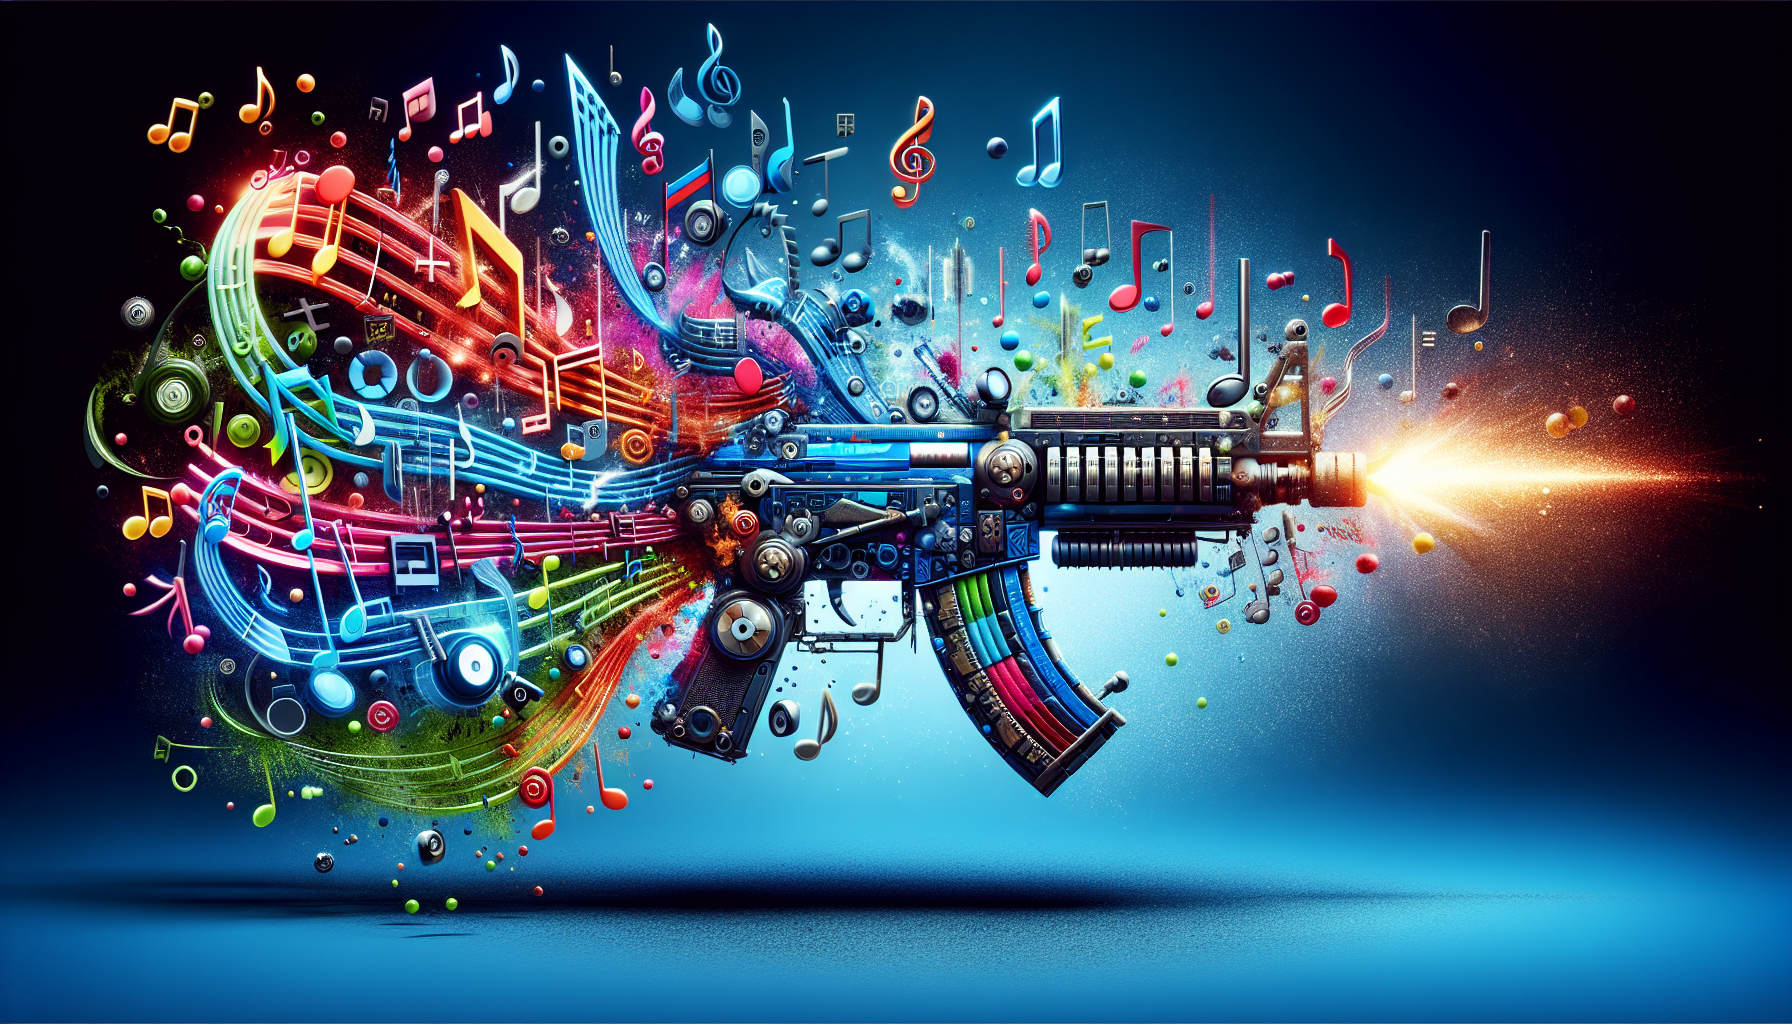 Visualize a concept for the ultimate action movie soundtrack, embodied as a weapon in a bright, modern style. There are no words, only music notes and symbols depicted with realistic textures and hyperrealistic lighting effects. Imagine this weapon being composed of different musical elements, each representing a unique track of the soundtrack, creating a colorful and dynamic illustration. The overall aesthetics should mirror the pacing, rhythm, and energy of an action movie, with bursts of vibrant colors and dramatic shadows, expressing the power of music in a spectacular way.